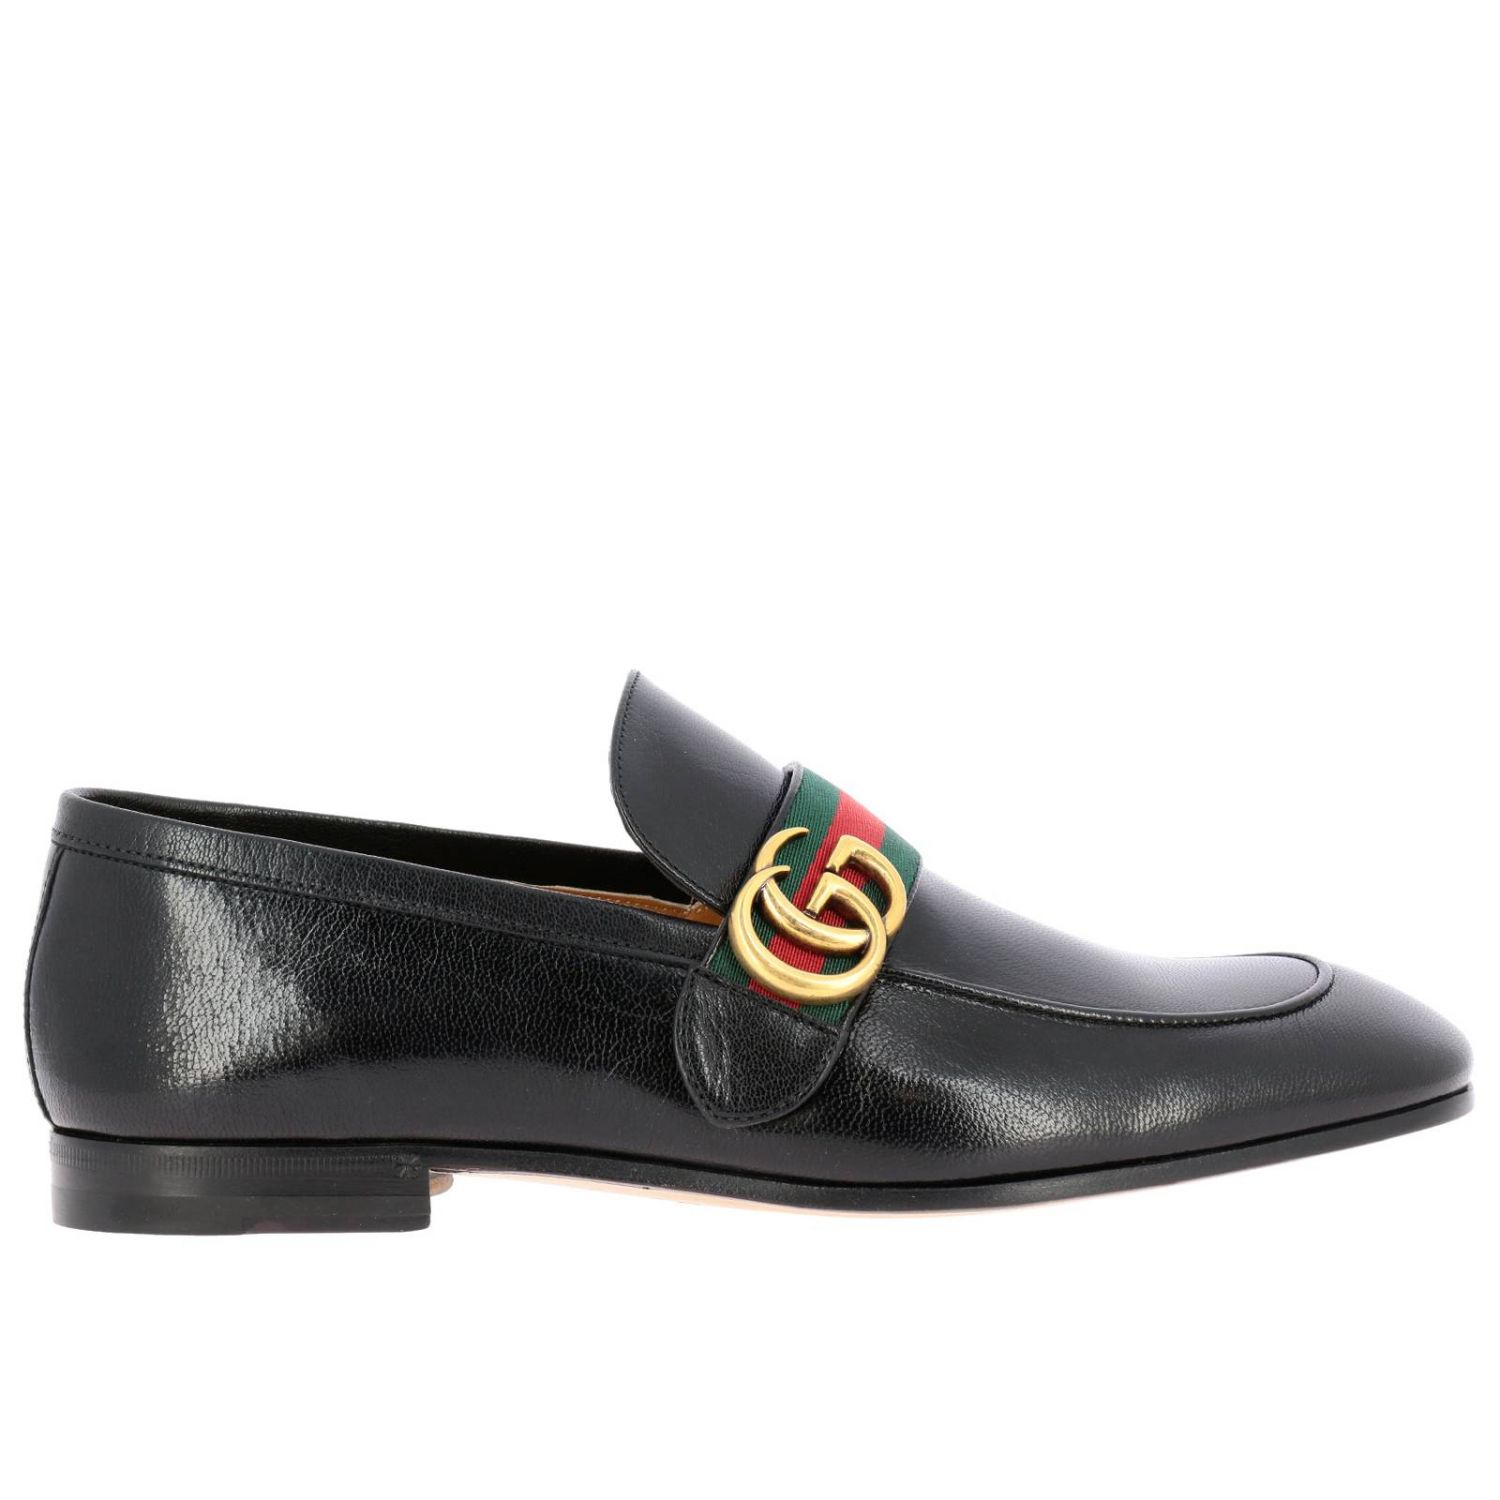 GUCCI: Shoes men | Loafers Gucci Men Black | Loafers Gucci 428609 D3VN0 ...